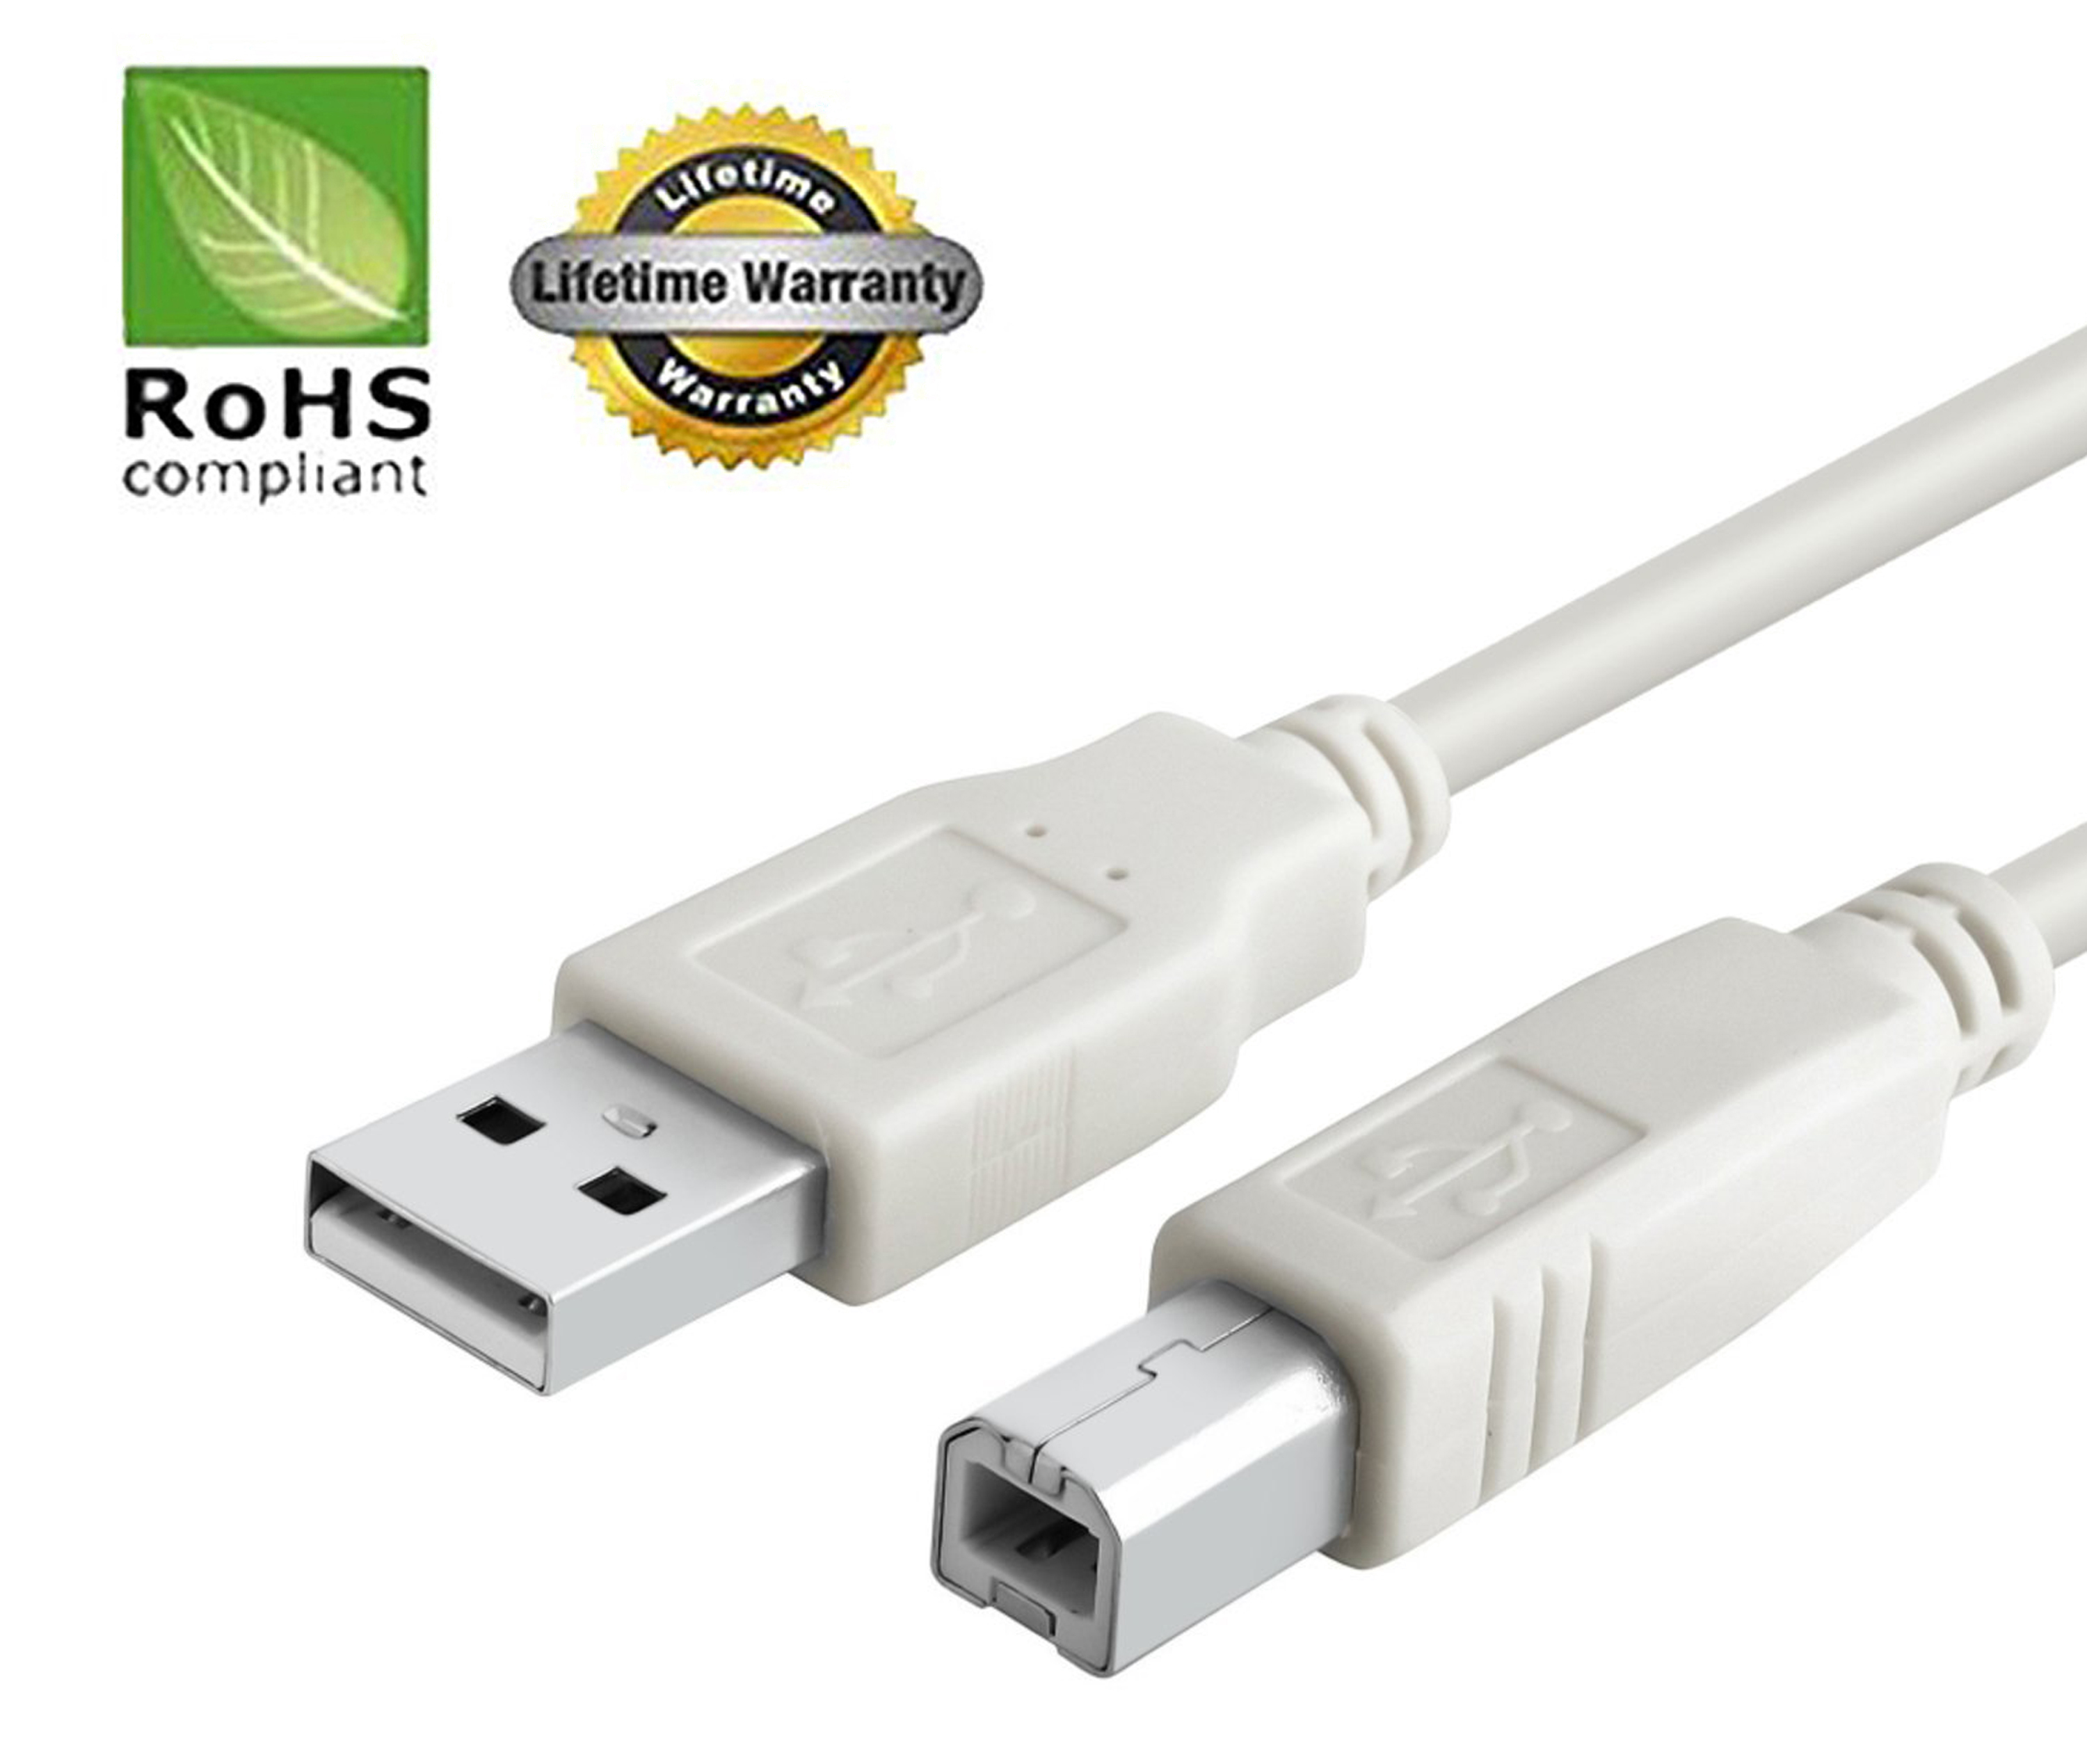 USB 2.0 Cable - A-Male to B-Male for Centrance HiFi-M8 (Specific Models Only) - 10 FT/2 PACK/IVORY - image 1 of 5